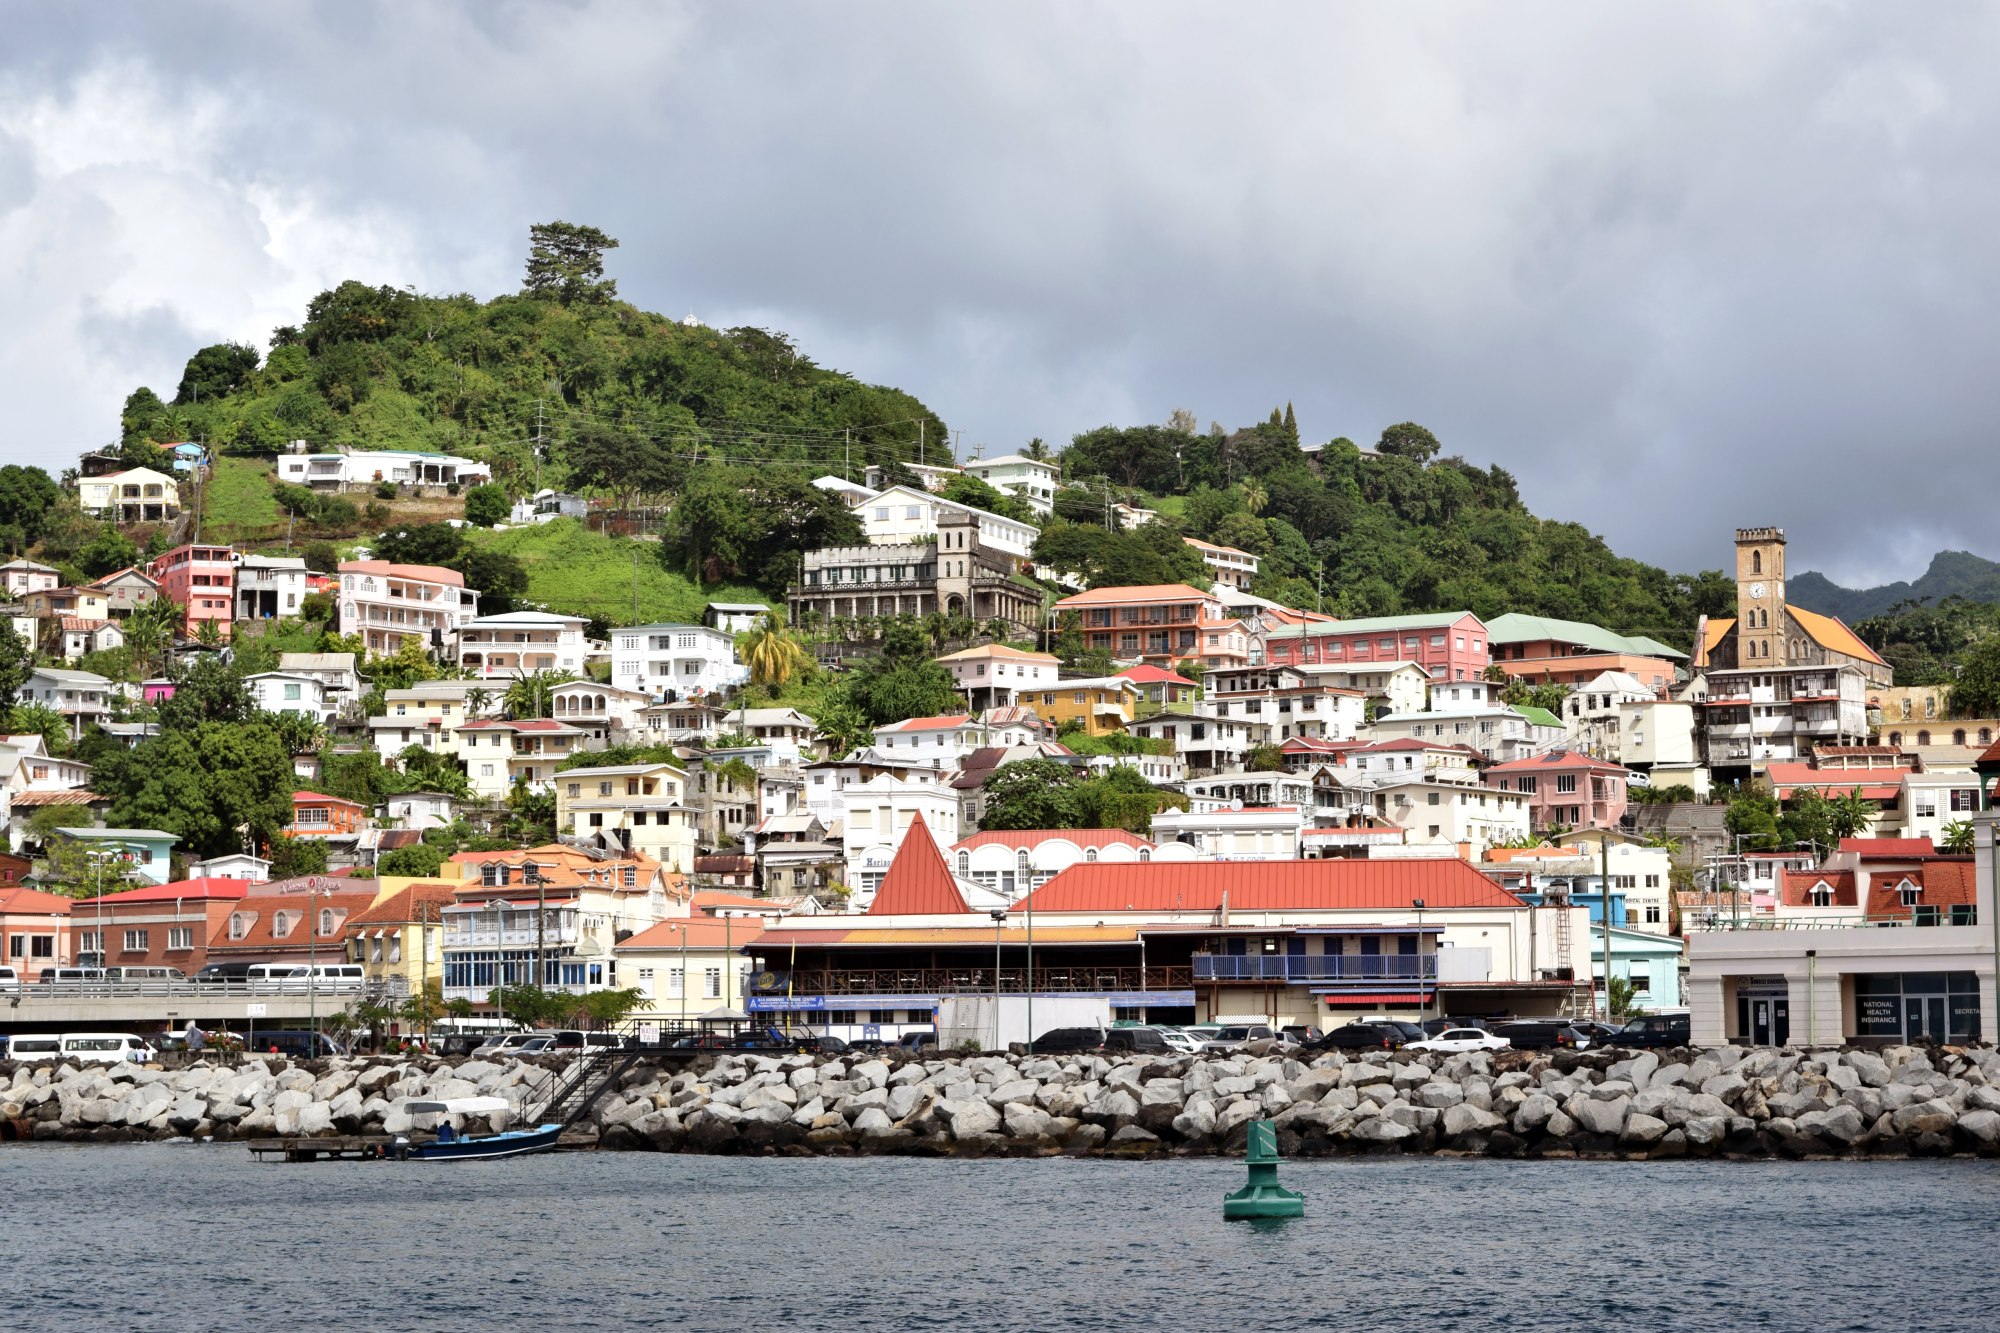 Grenada was one of our last stops on the cruise at Christmas